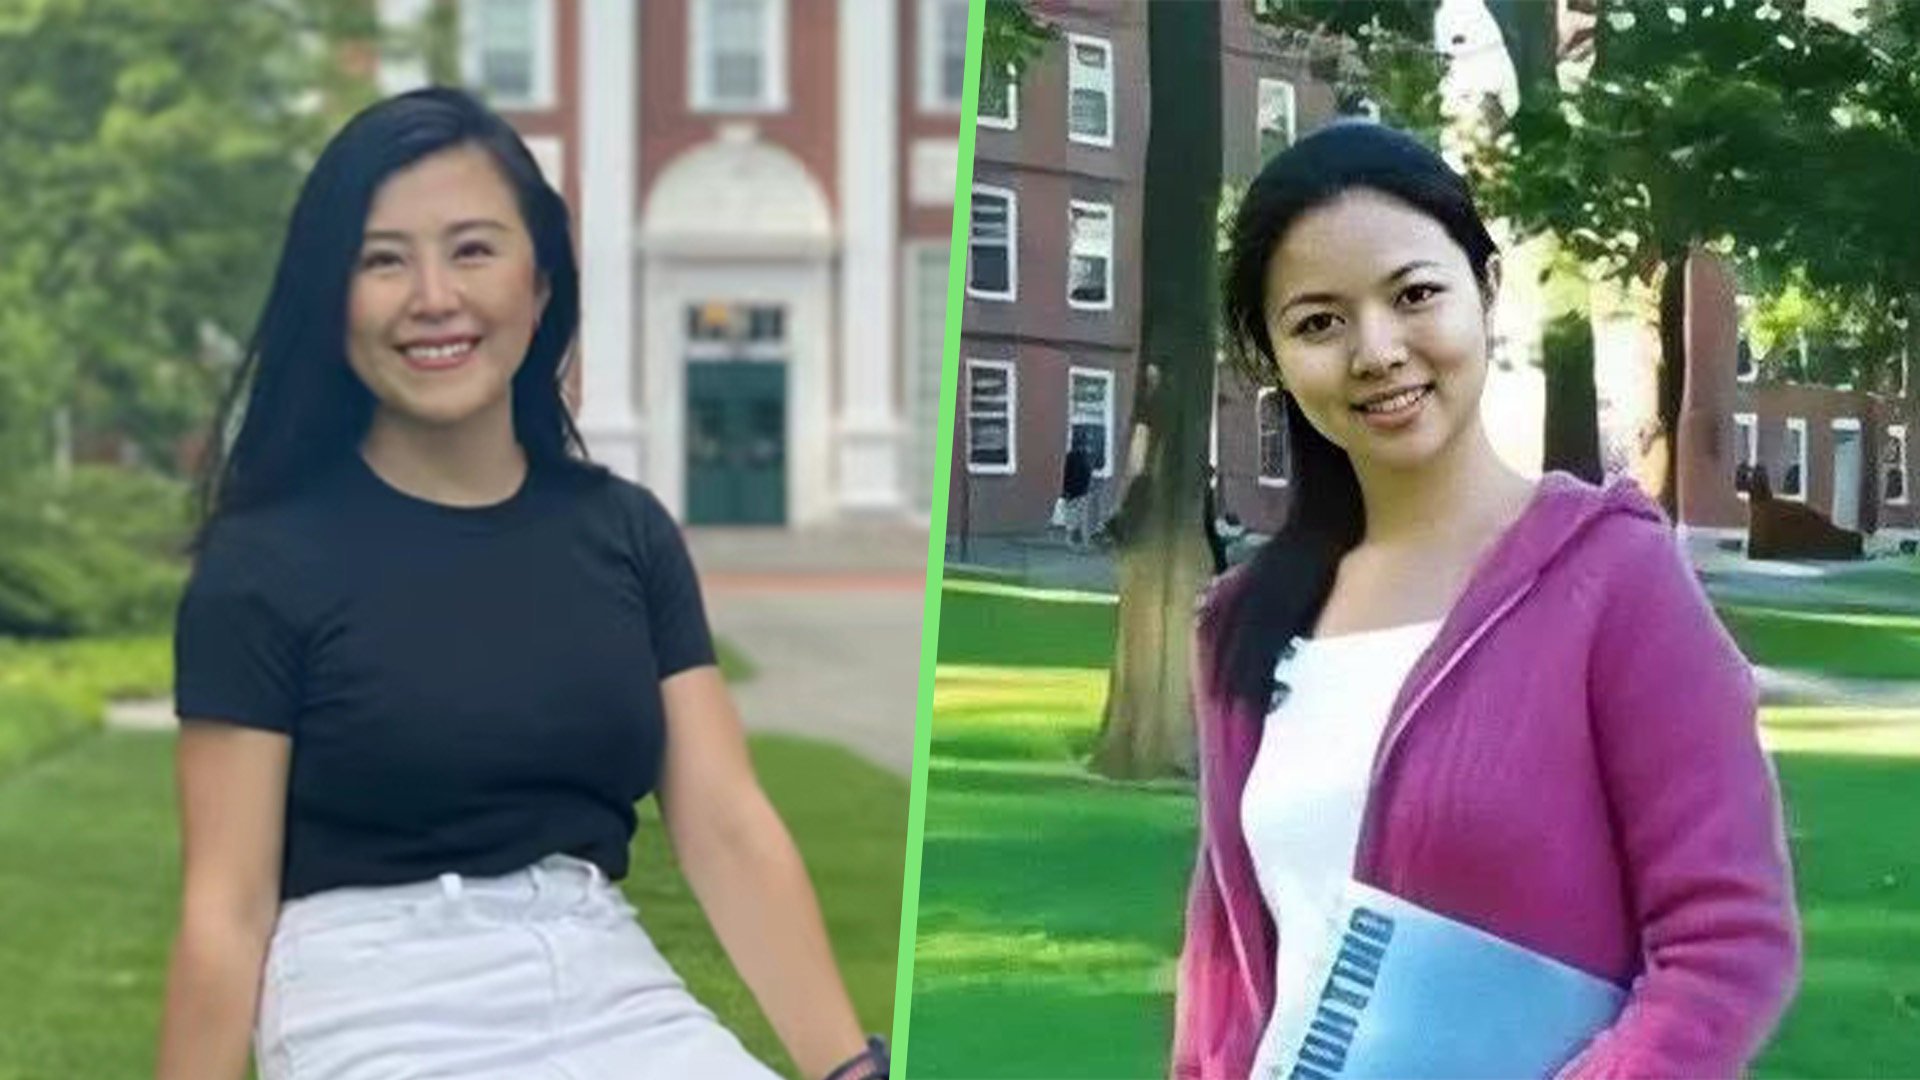 34-year-old Ivy League-educated Zhang Qian, left, who sought to emulate the famous “Harvard Girl”, Liu Yiting, right, has quit her high-pressure life in the US and moved to Portugal to enjoy a quiet life. Photo: SCMP composite/Toutiao/Sohu